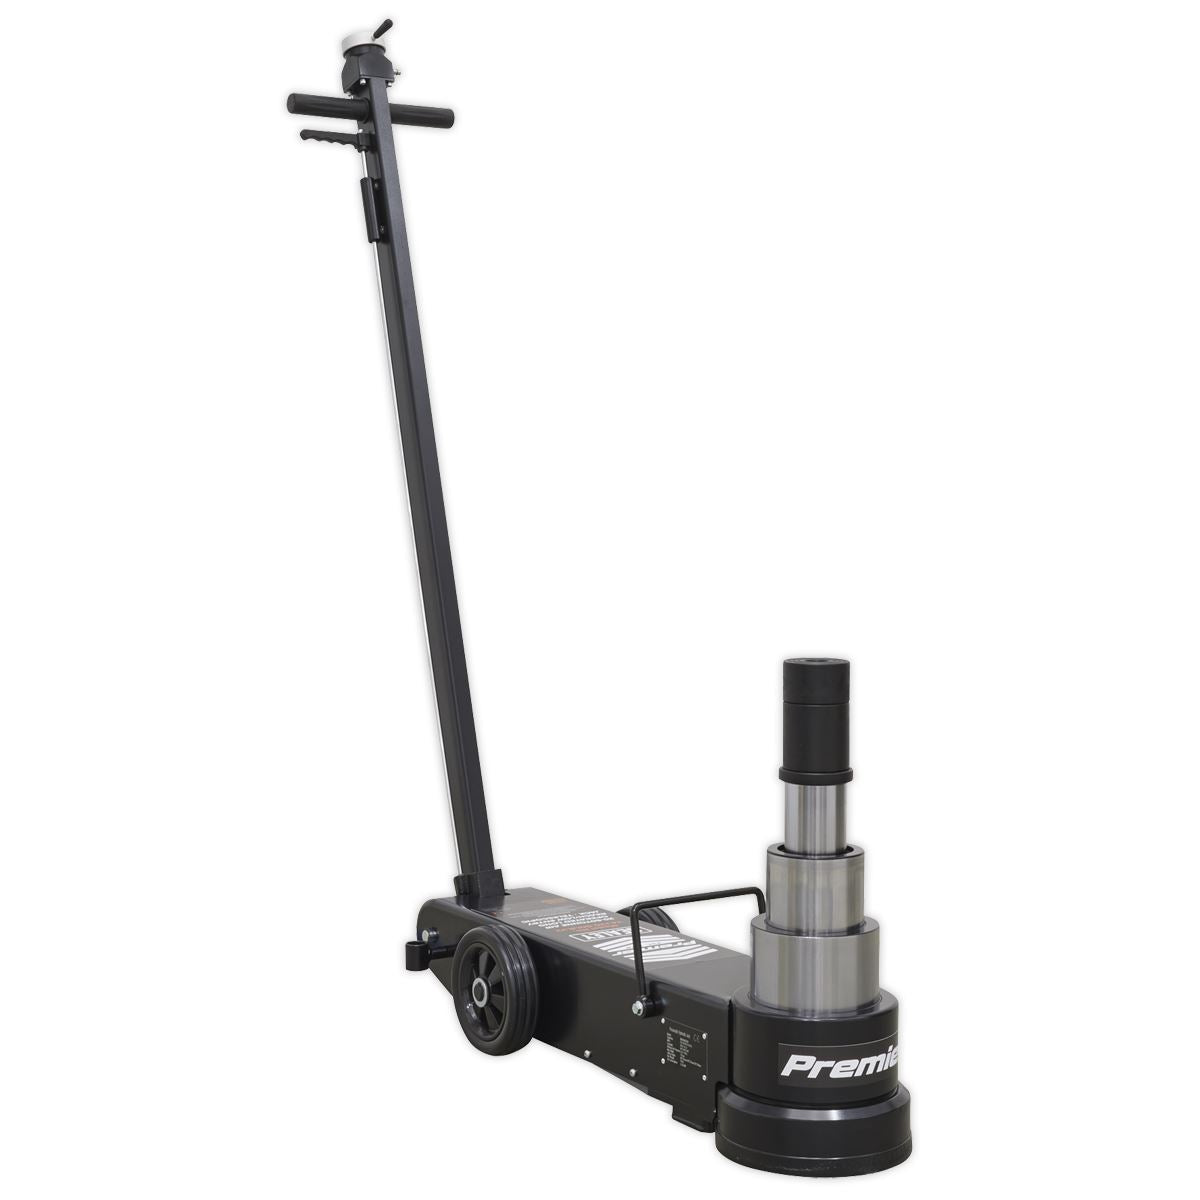 Sealey Long Reach/Low Profile Air Operated Telescopic Jack 20-60 Tonne